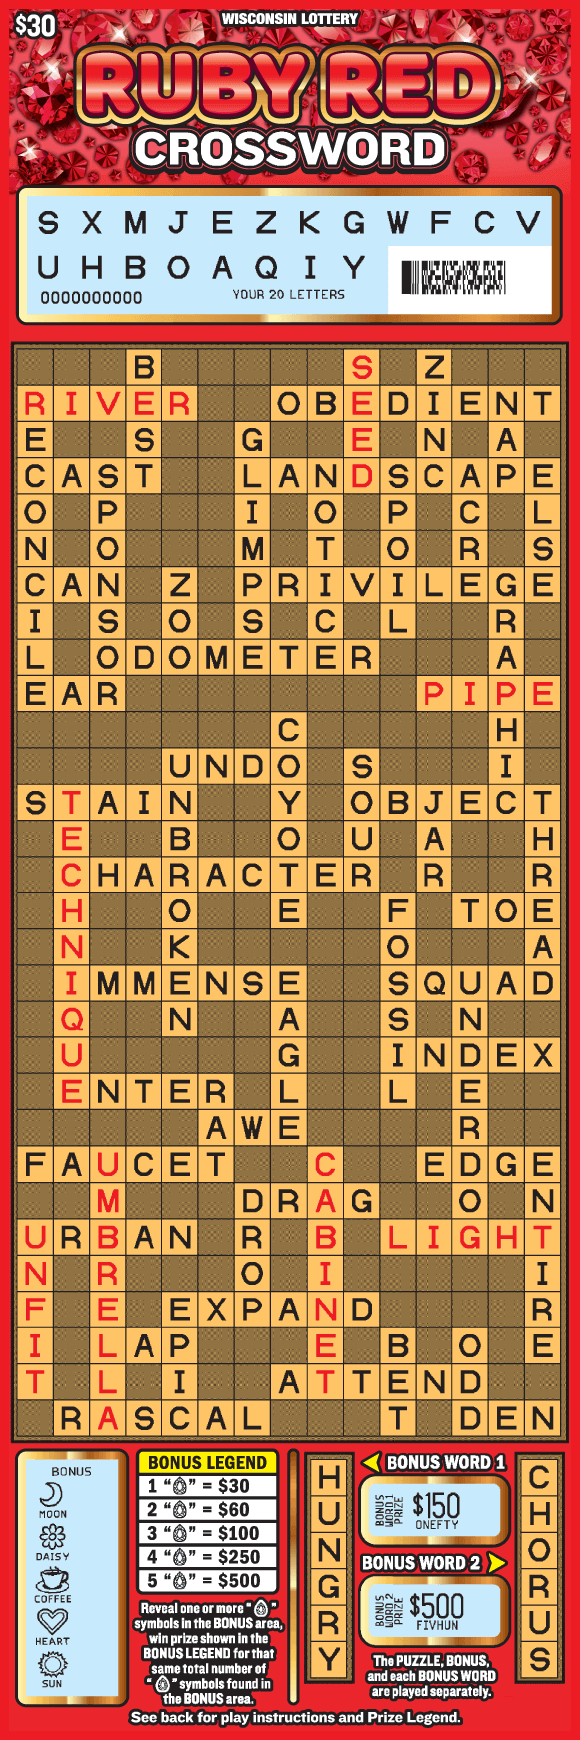 assortment of shimmering red rubies on bright red background with tall gold crossword board on Wisconsin Lottery game